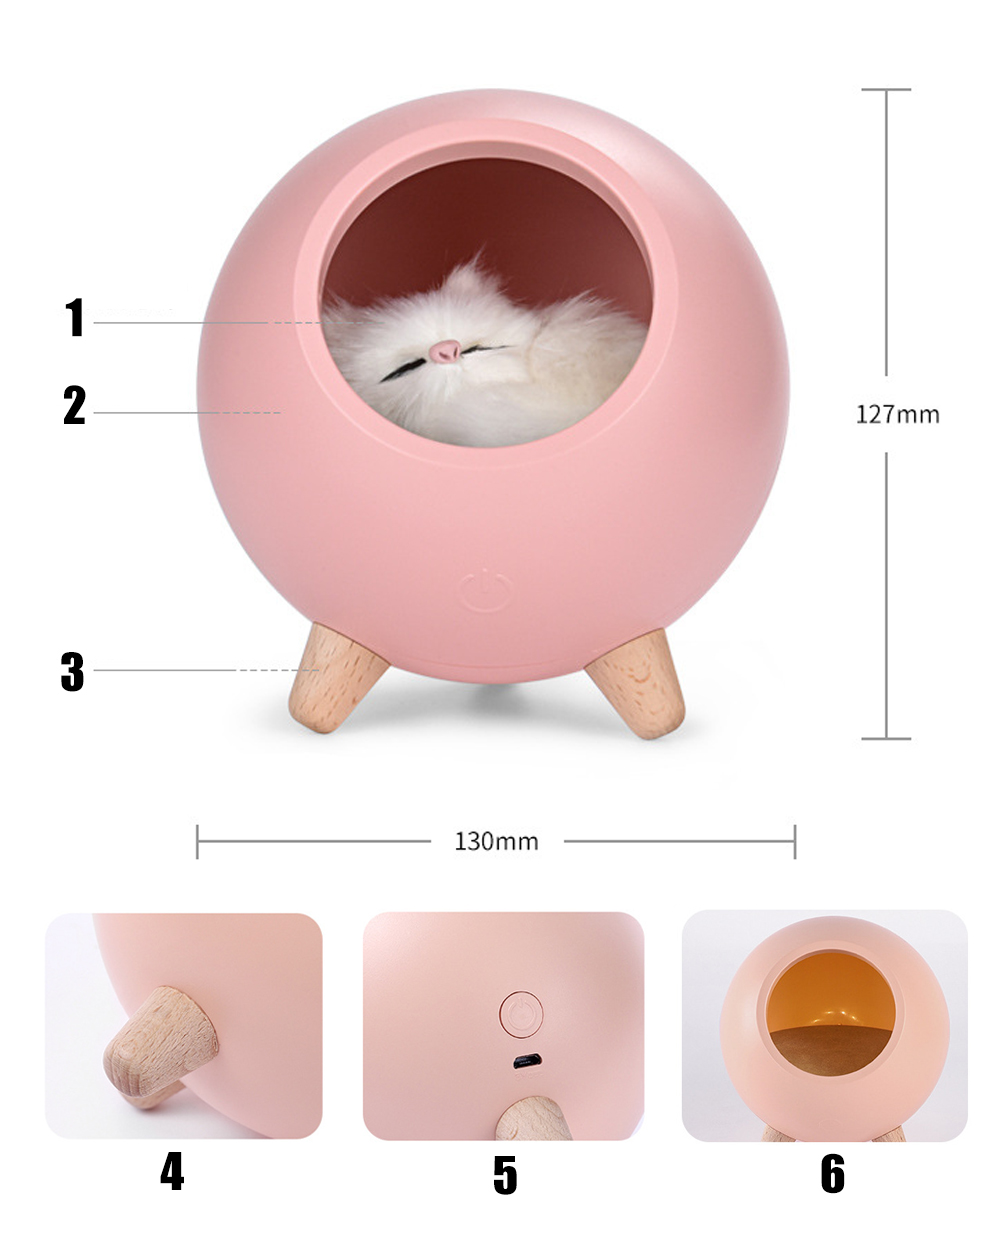 Novely-LED-Pet-House-Atmosphere-Night-Light-Touch-Dimming-Cat-Lamp-USB-Rechargeable-Table-Lamps-Bedr-1838823-4